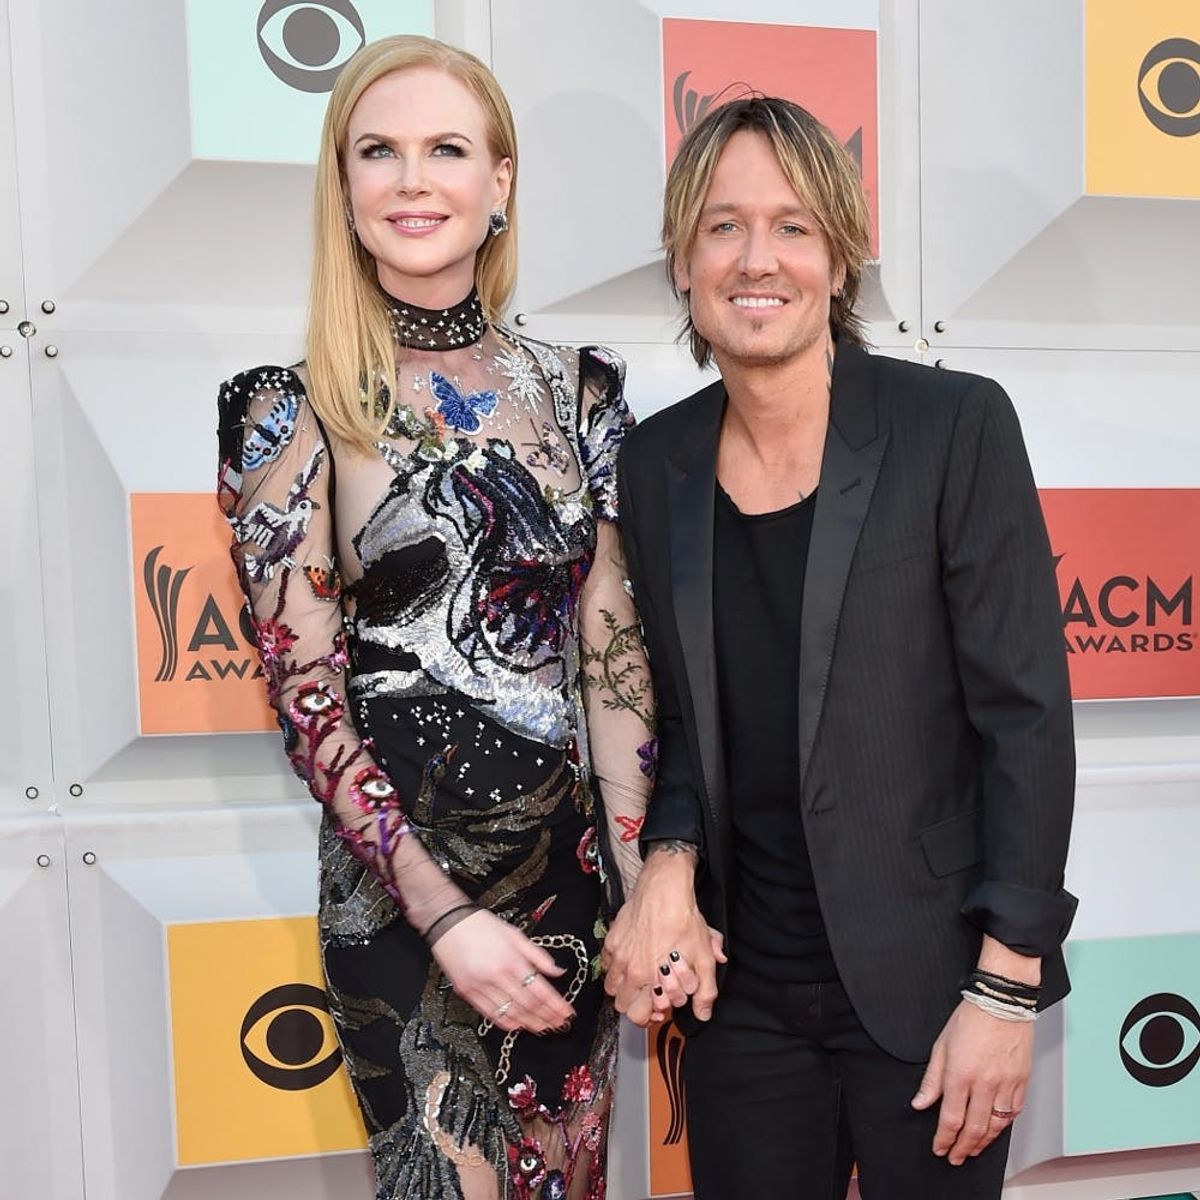 Keith Urban and Nicole Kidman’s Home Video Duet Will Make Your Day